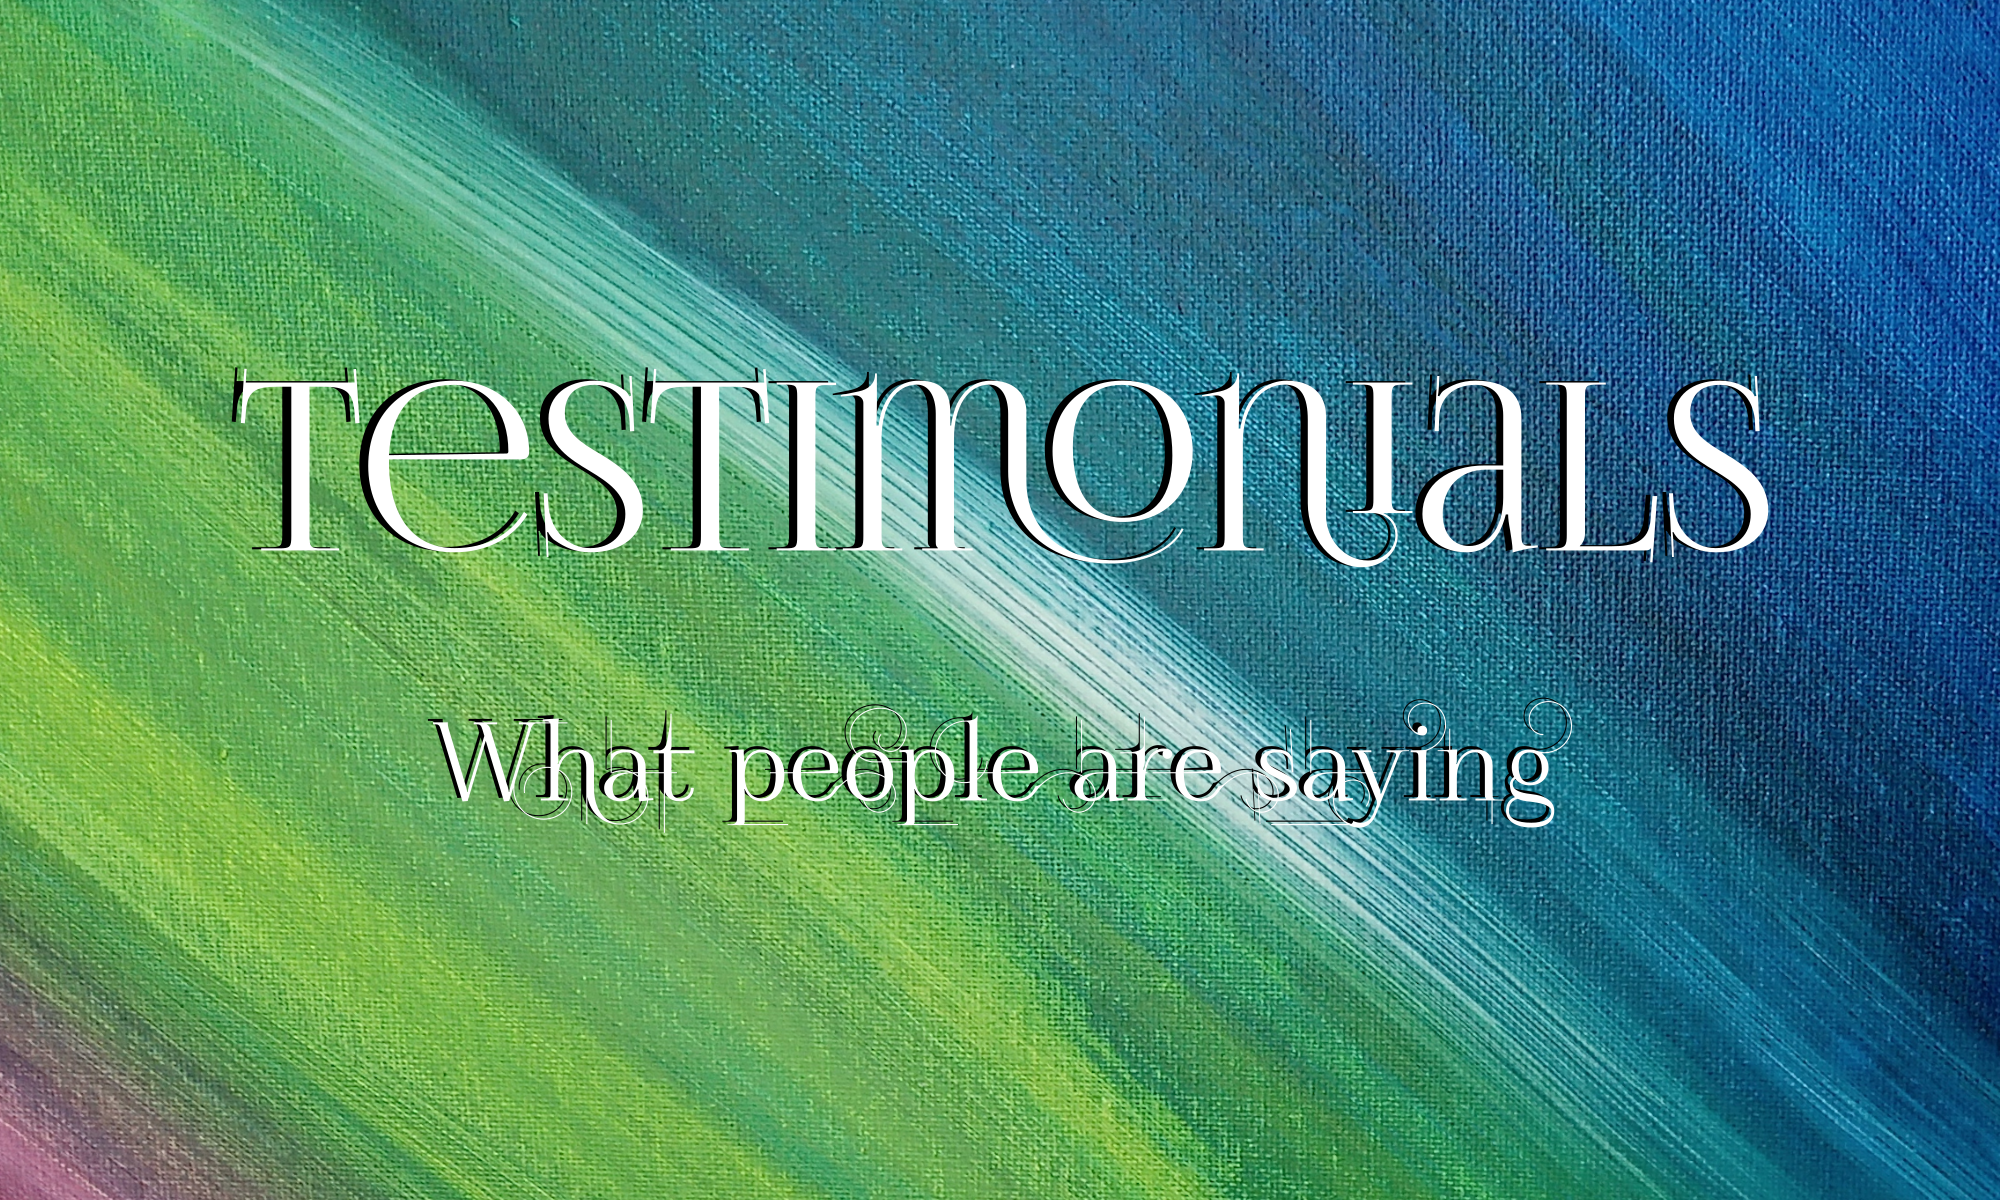 Testimonials - what people are saying